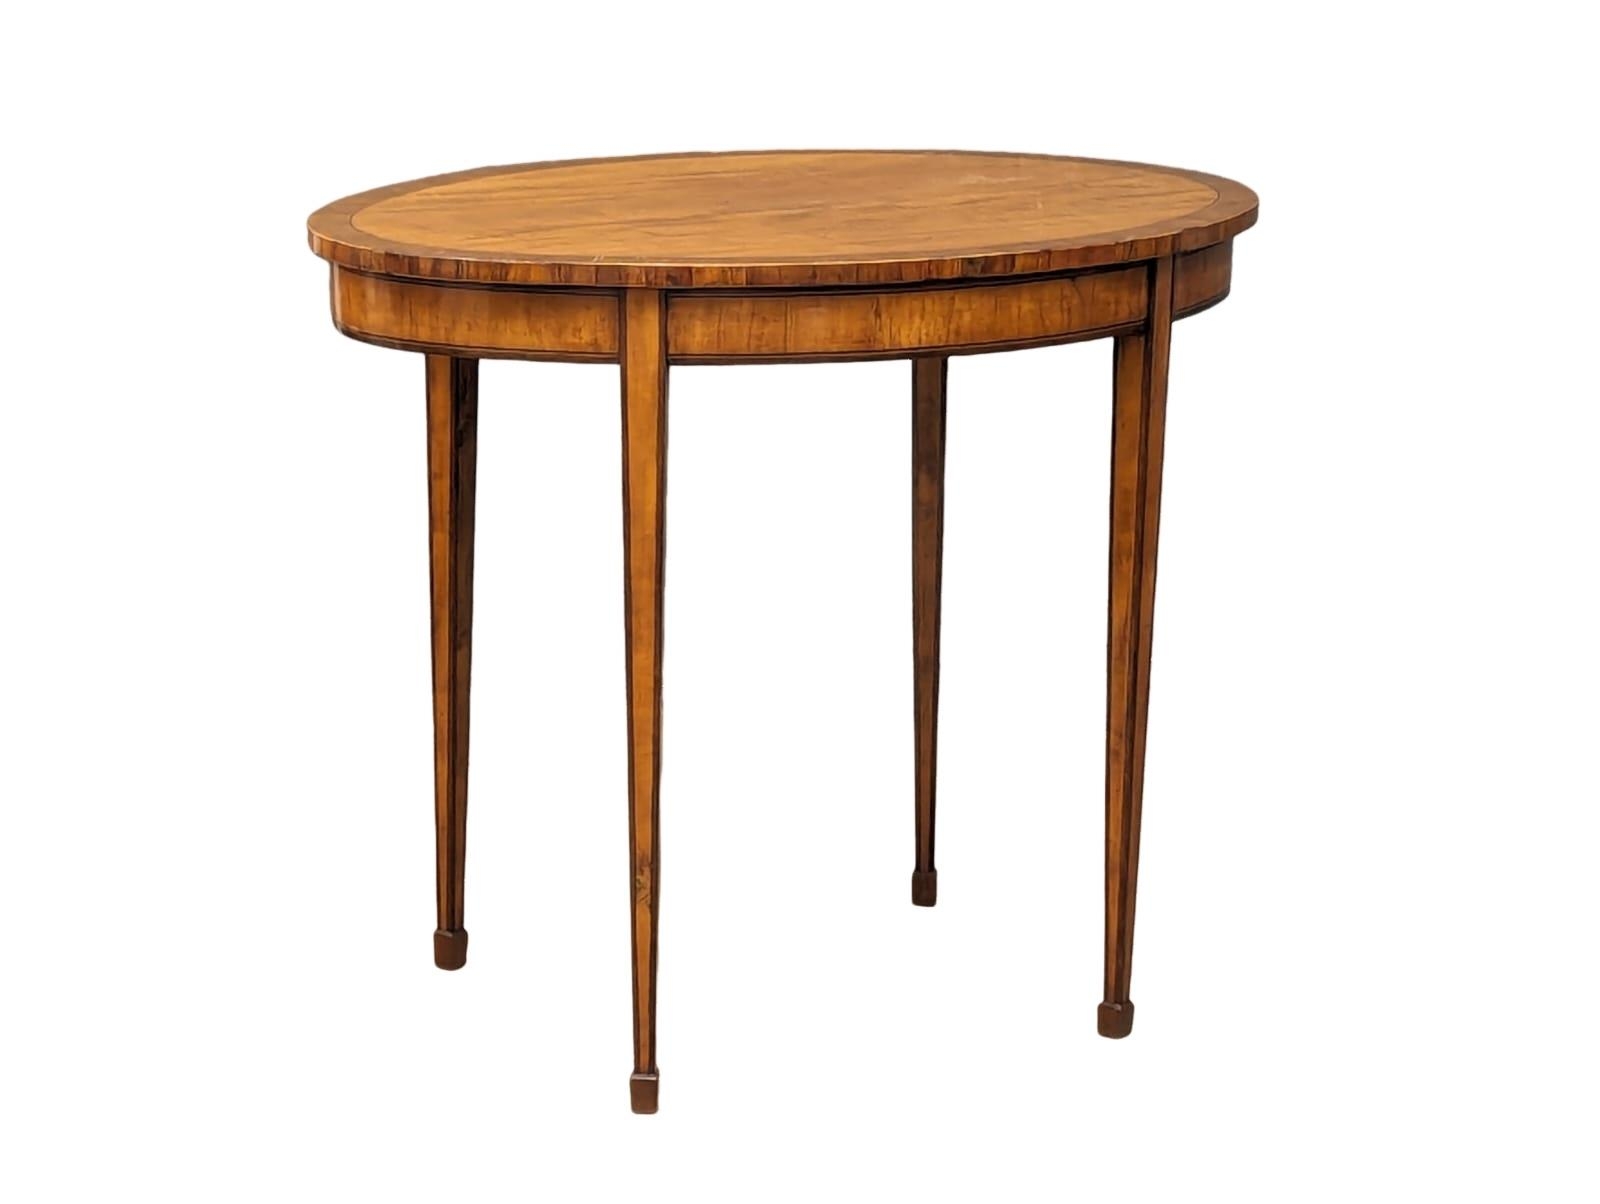 An Early 20th Century Sheraton Revival inlaid Satin and rosewood window table. Circa 1900. 88.5x60.